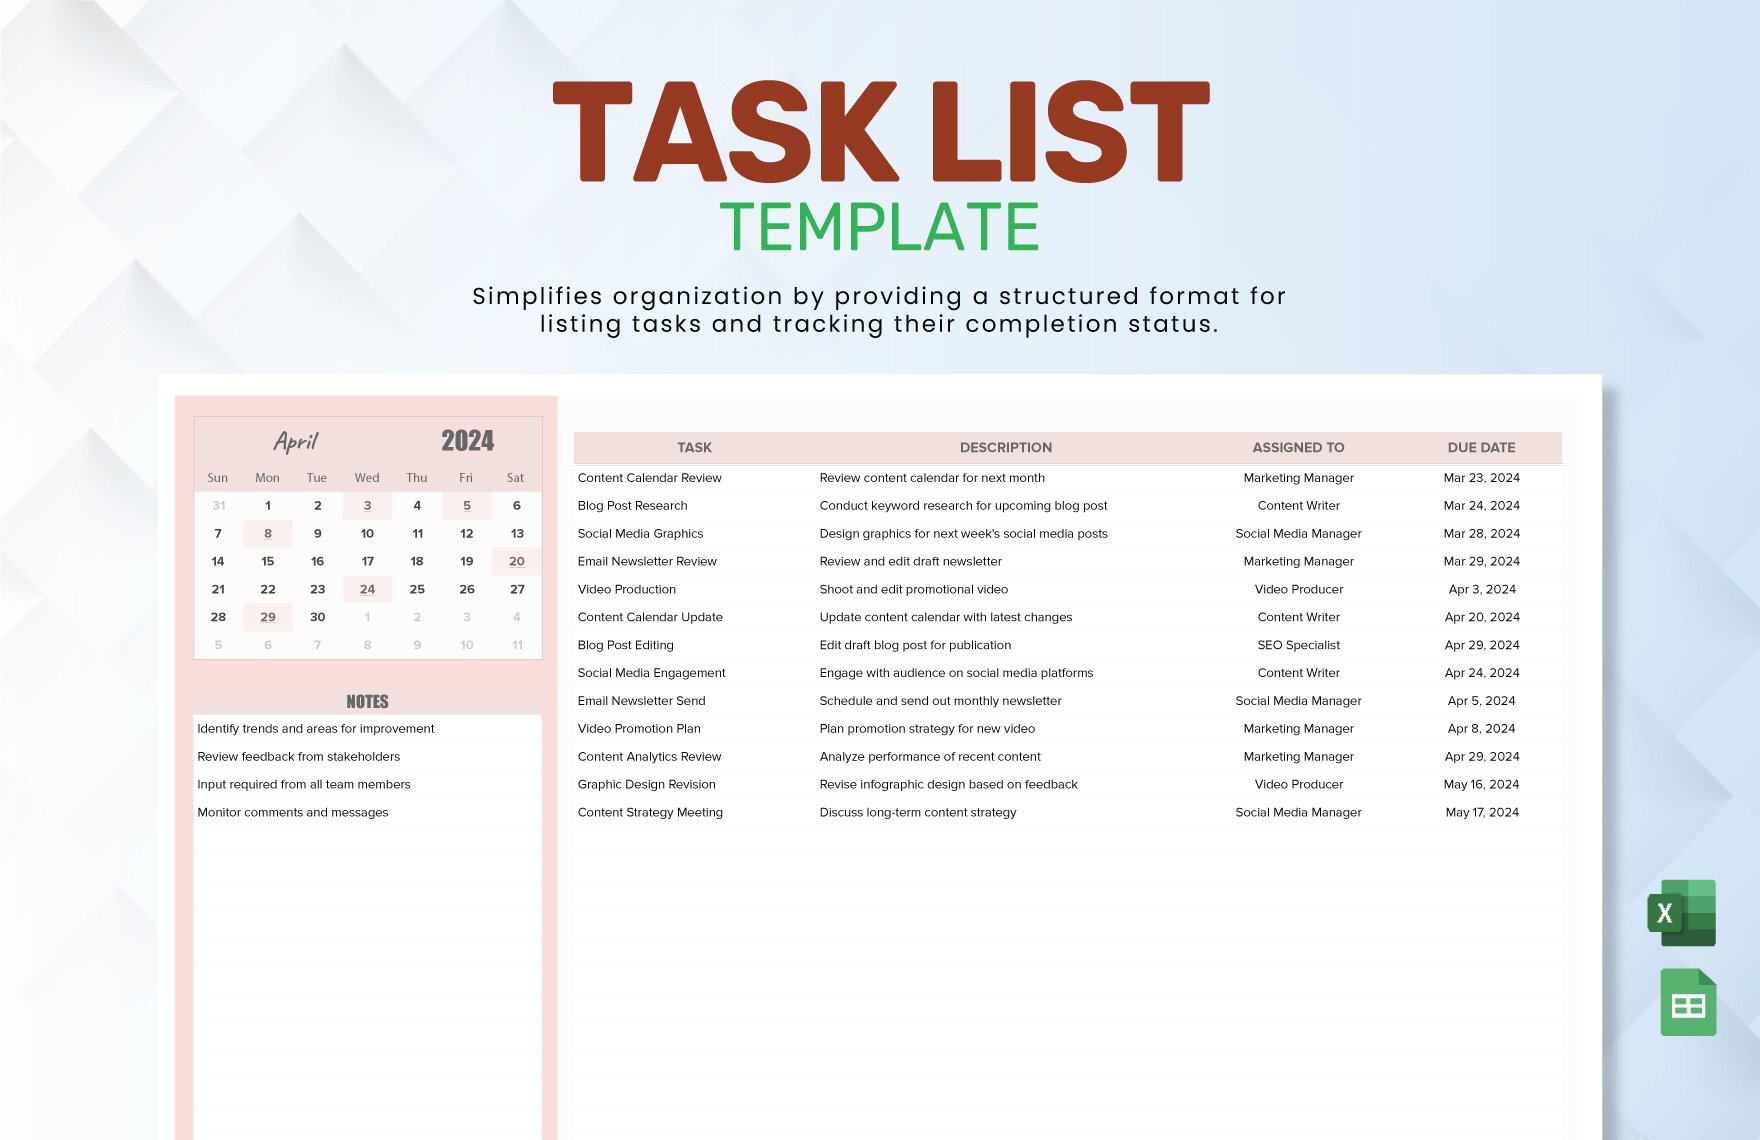 Task List Template in Excel, Google Sheets